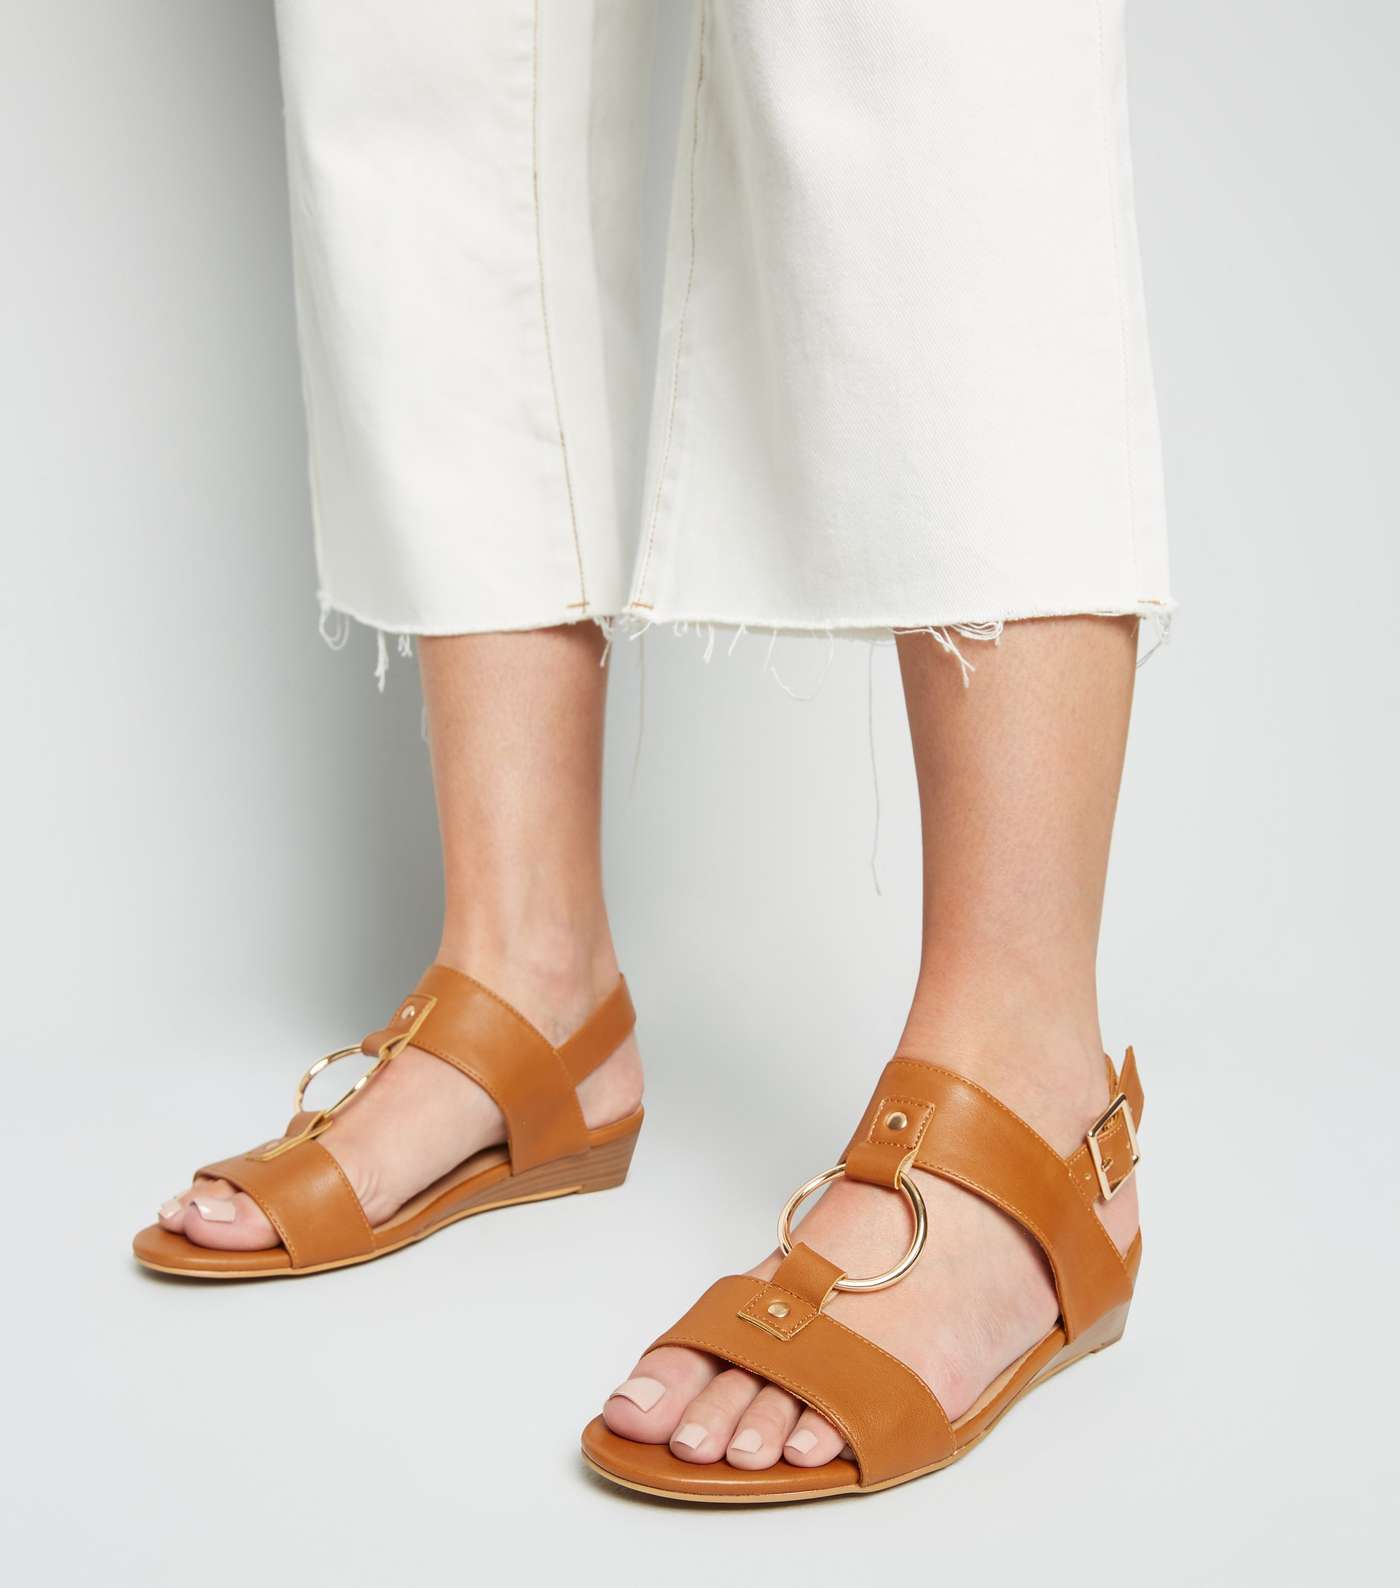 Tan Leather-Look Ring Strap Wedge Sandals Image 2